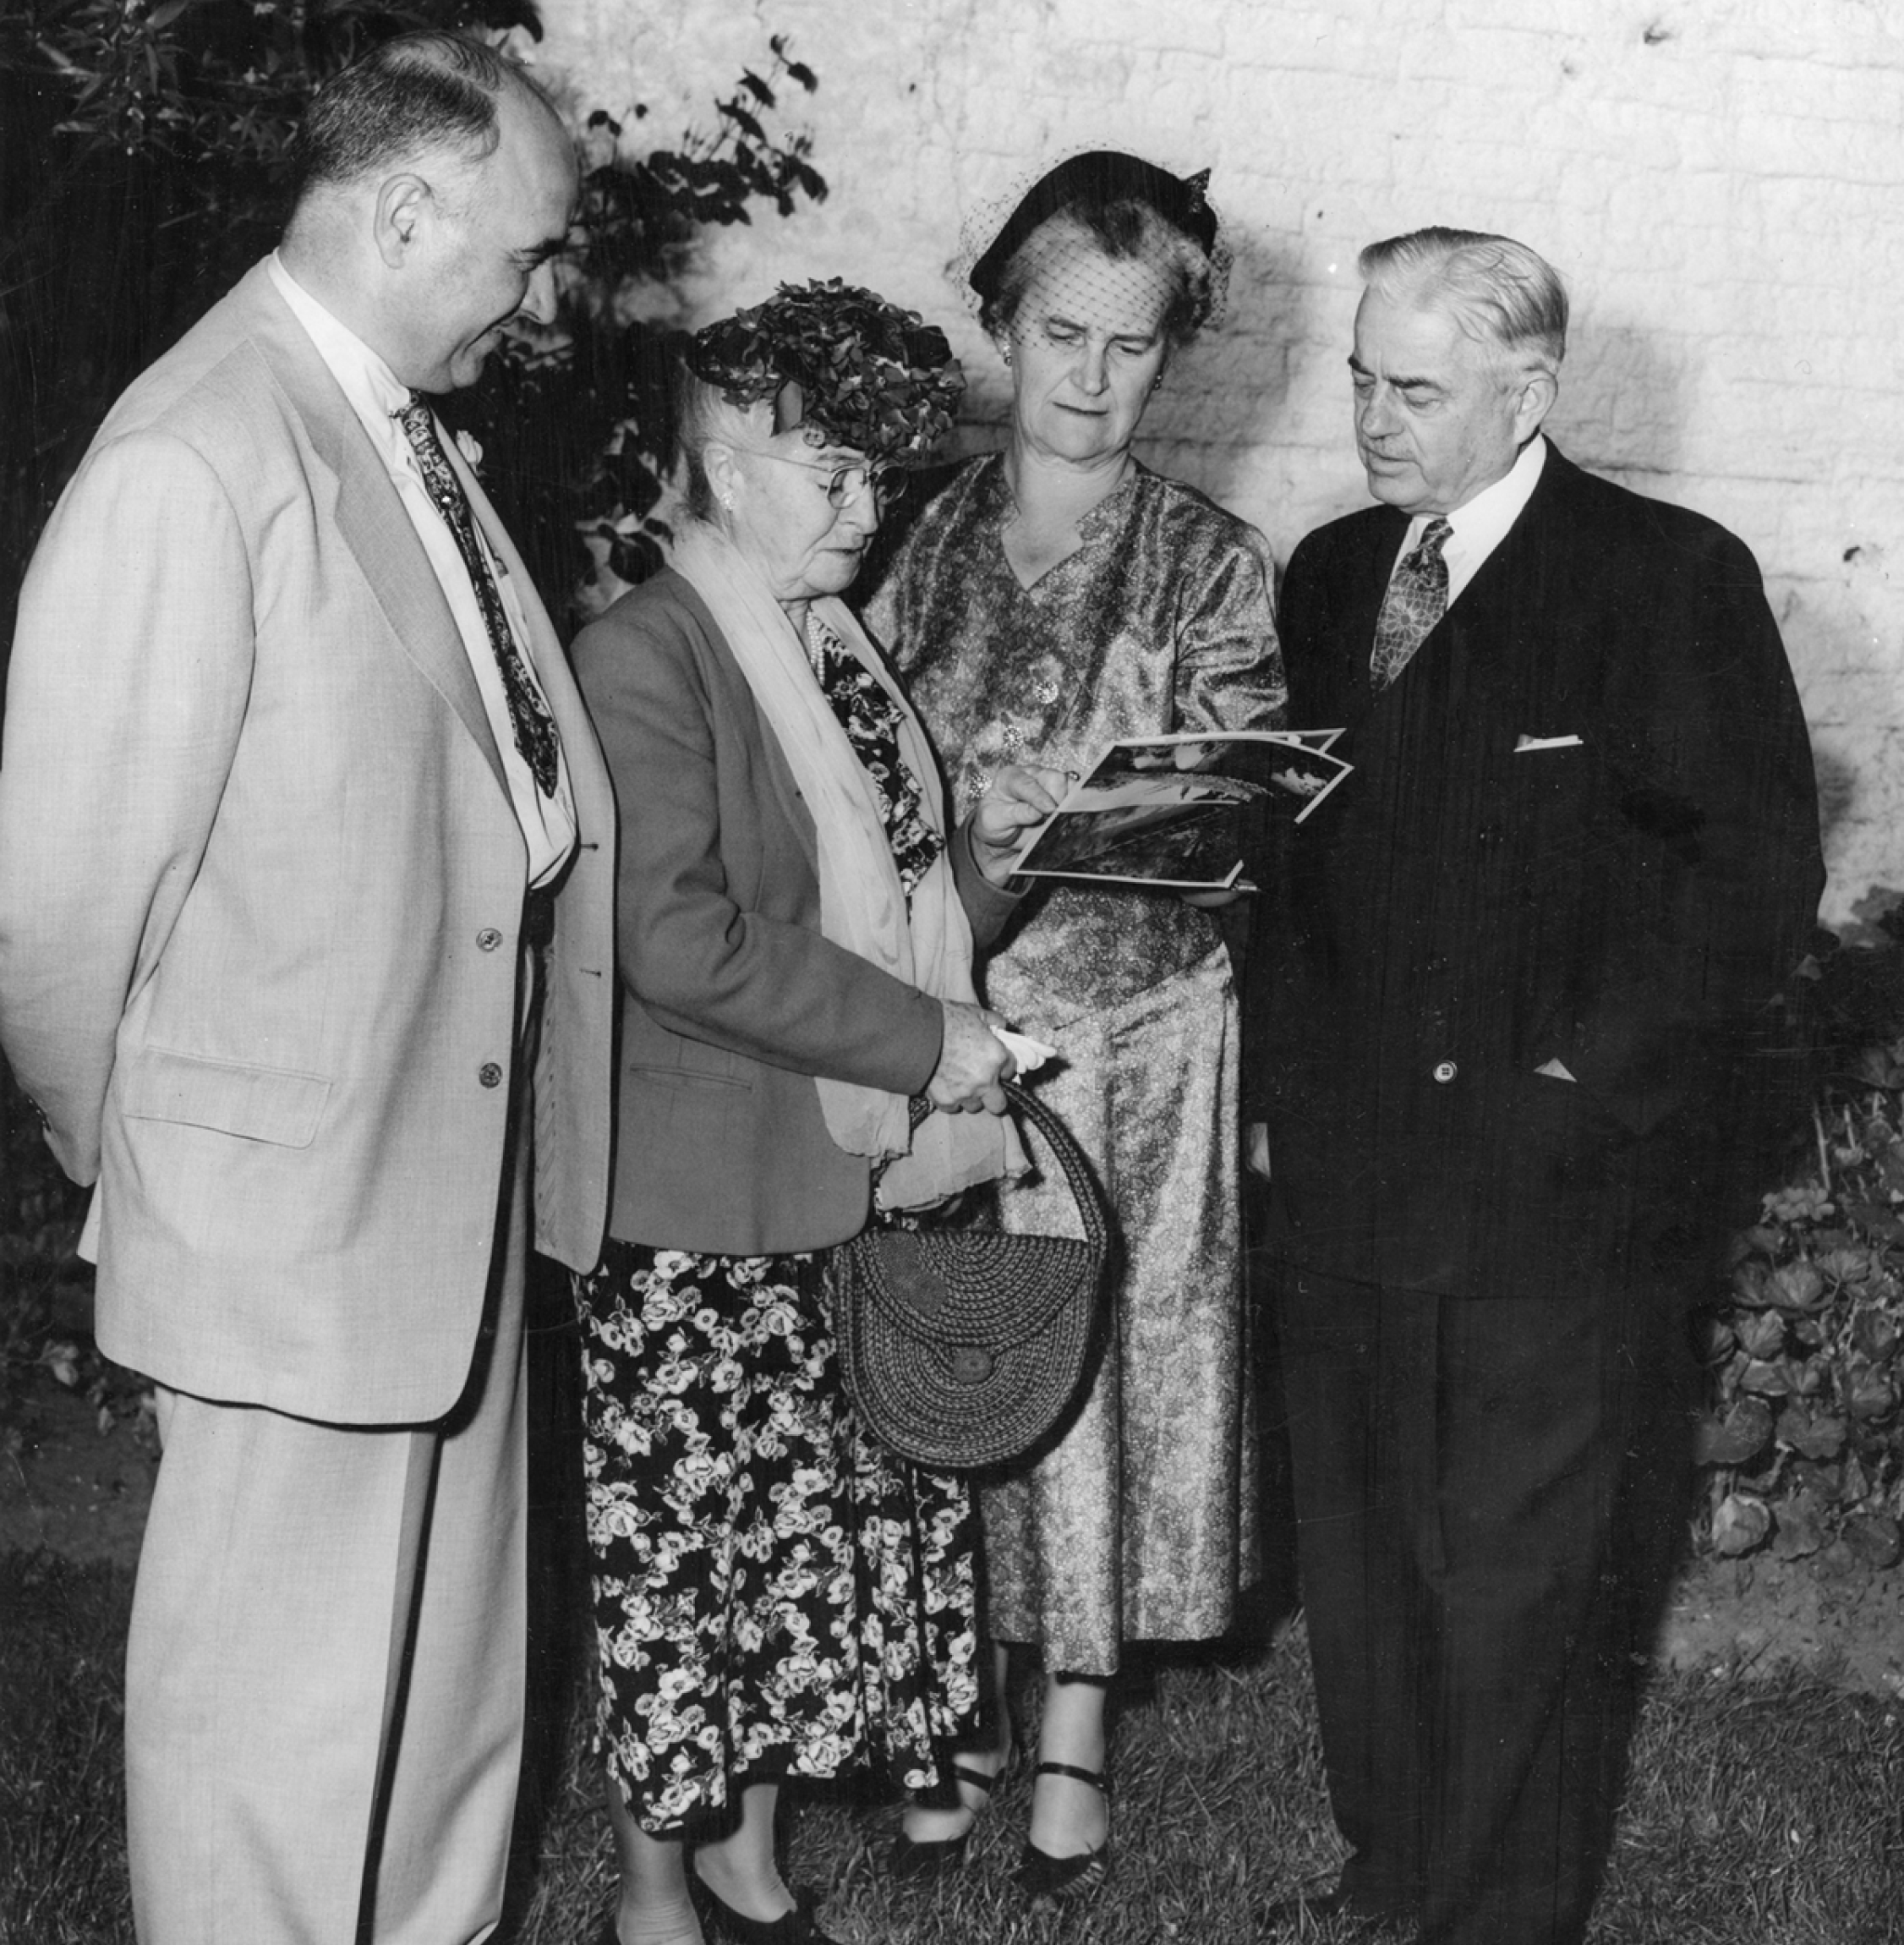 Laura Whipple wearing a dress, coat, and hat. She is standing beside 2 men in suits and a woman wearing a dress and hat. They are all looking at a photo.